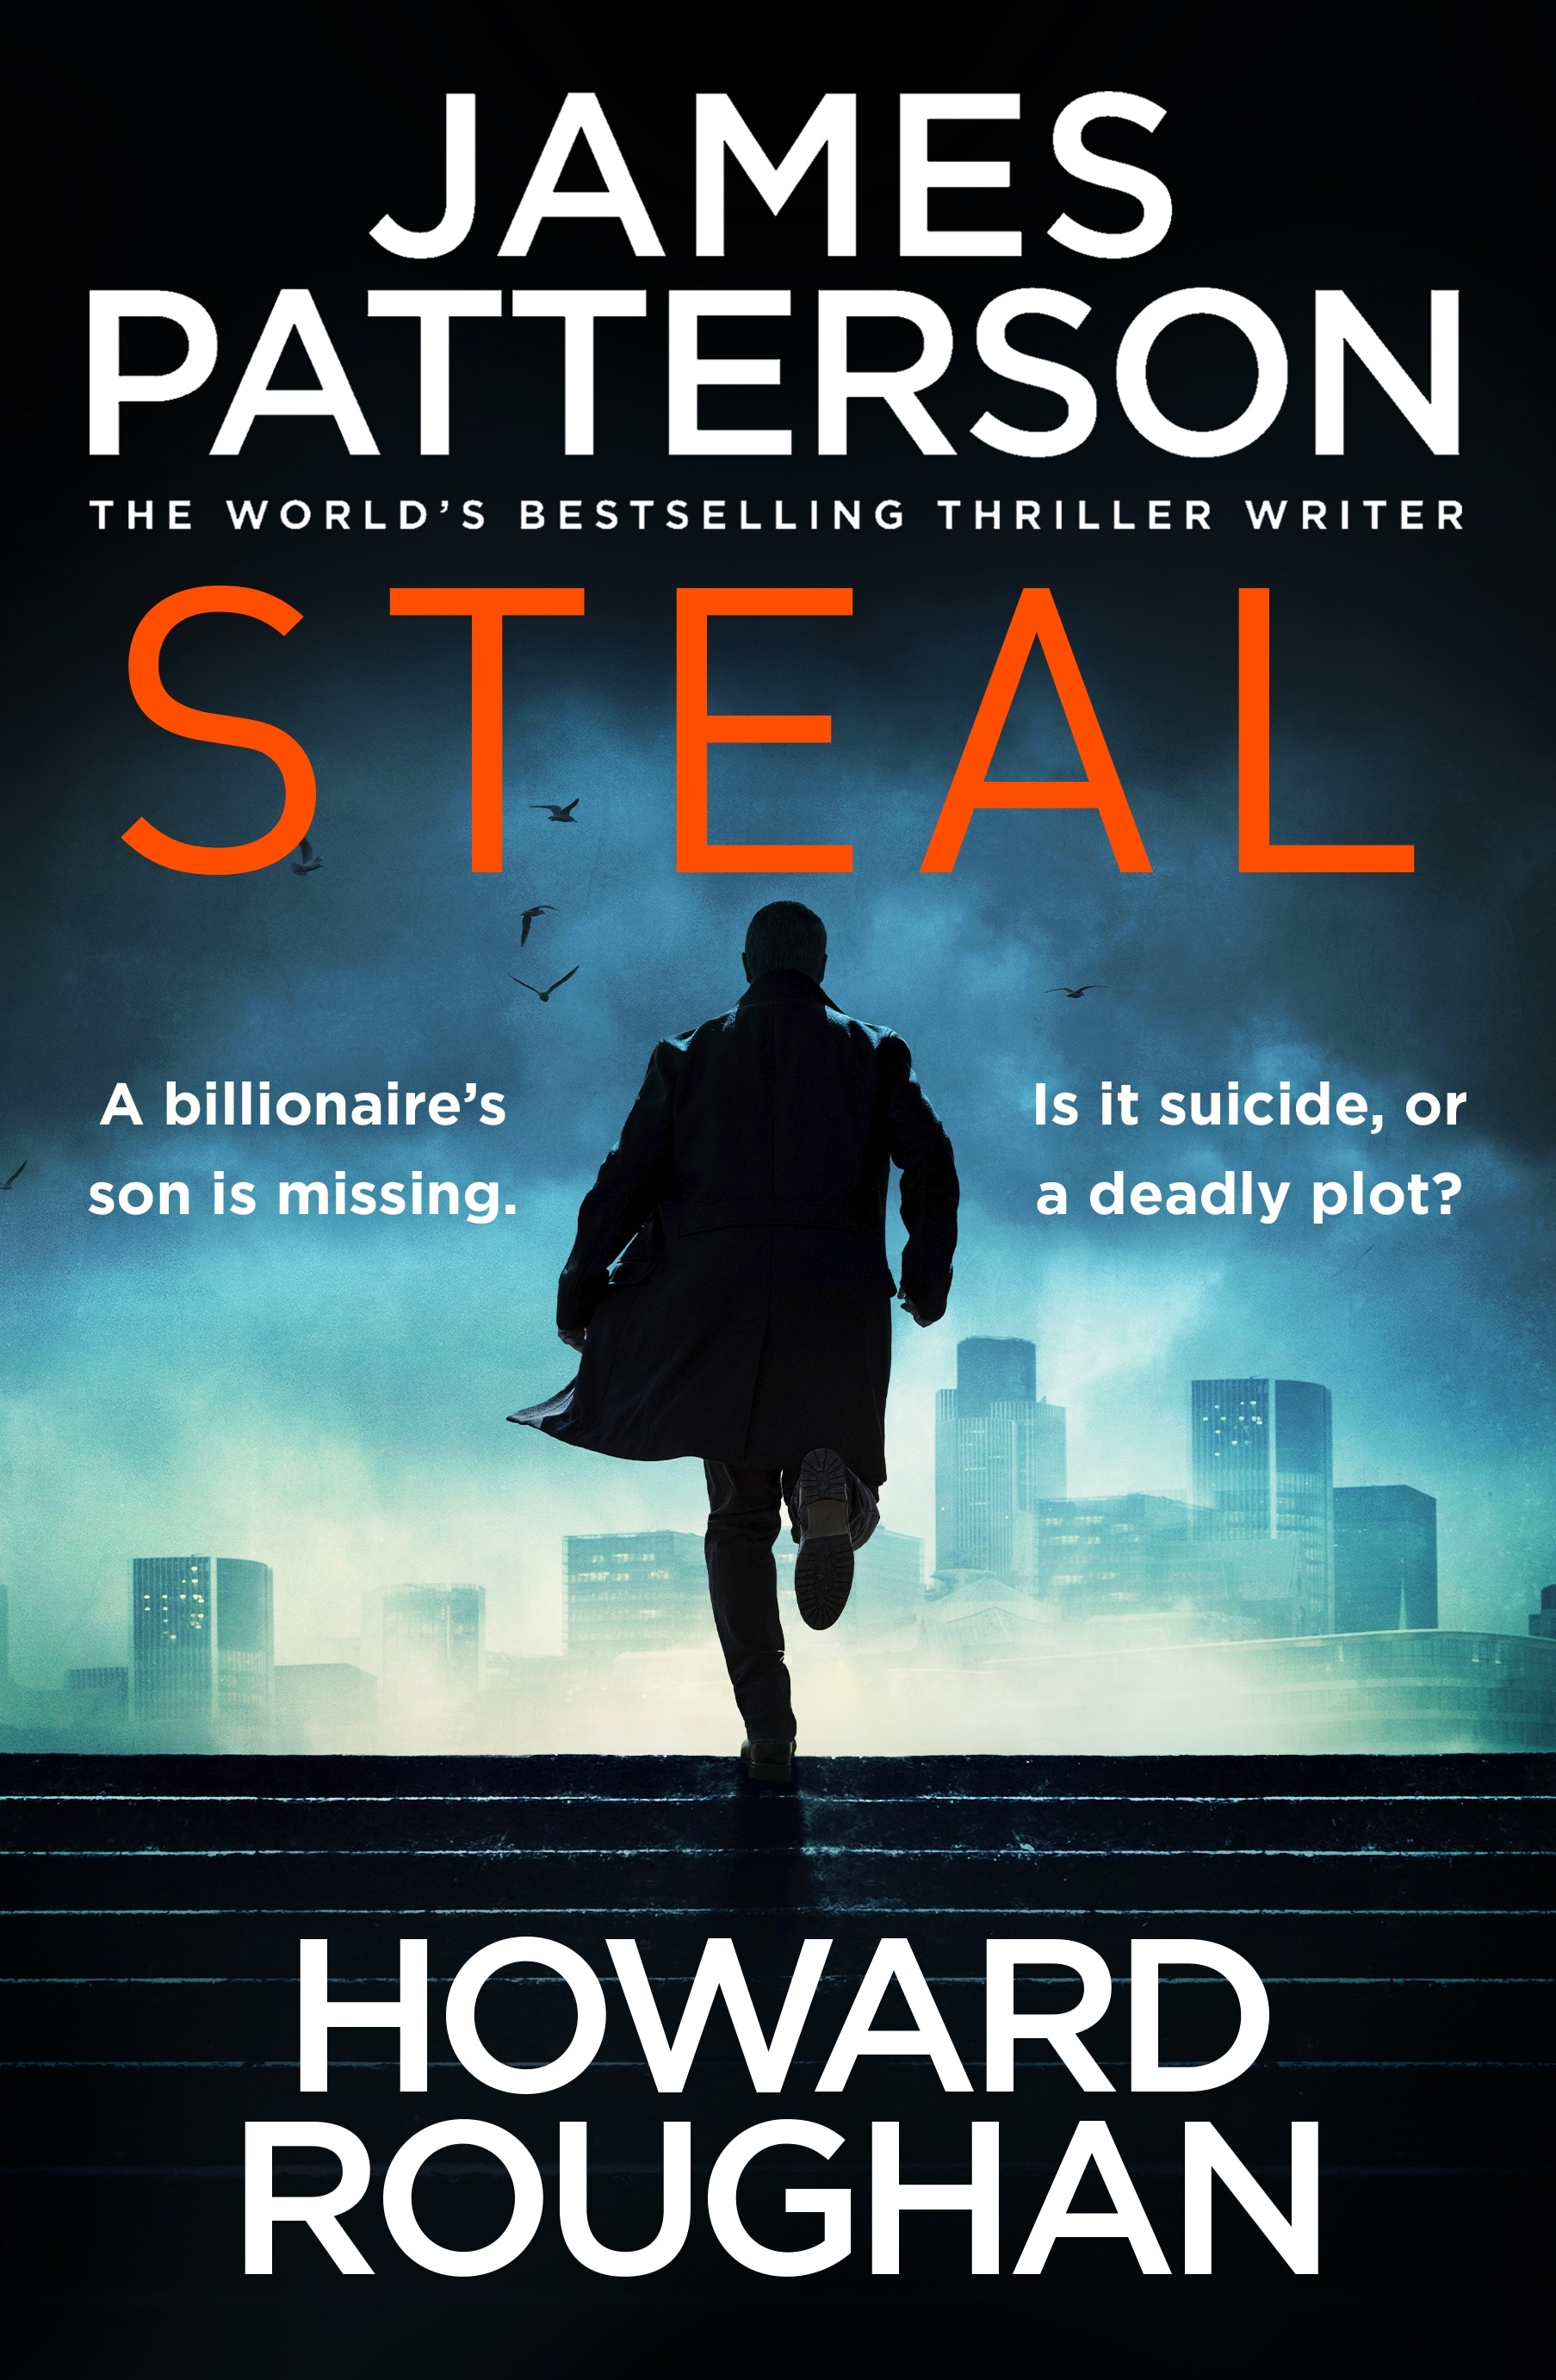 Book “Steal” by James Patterson — February 3, 2022